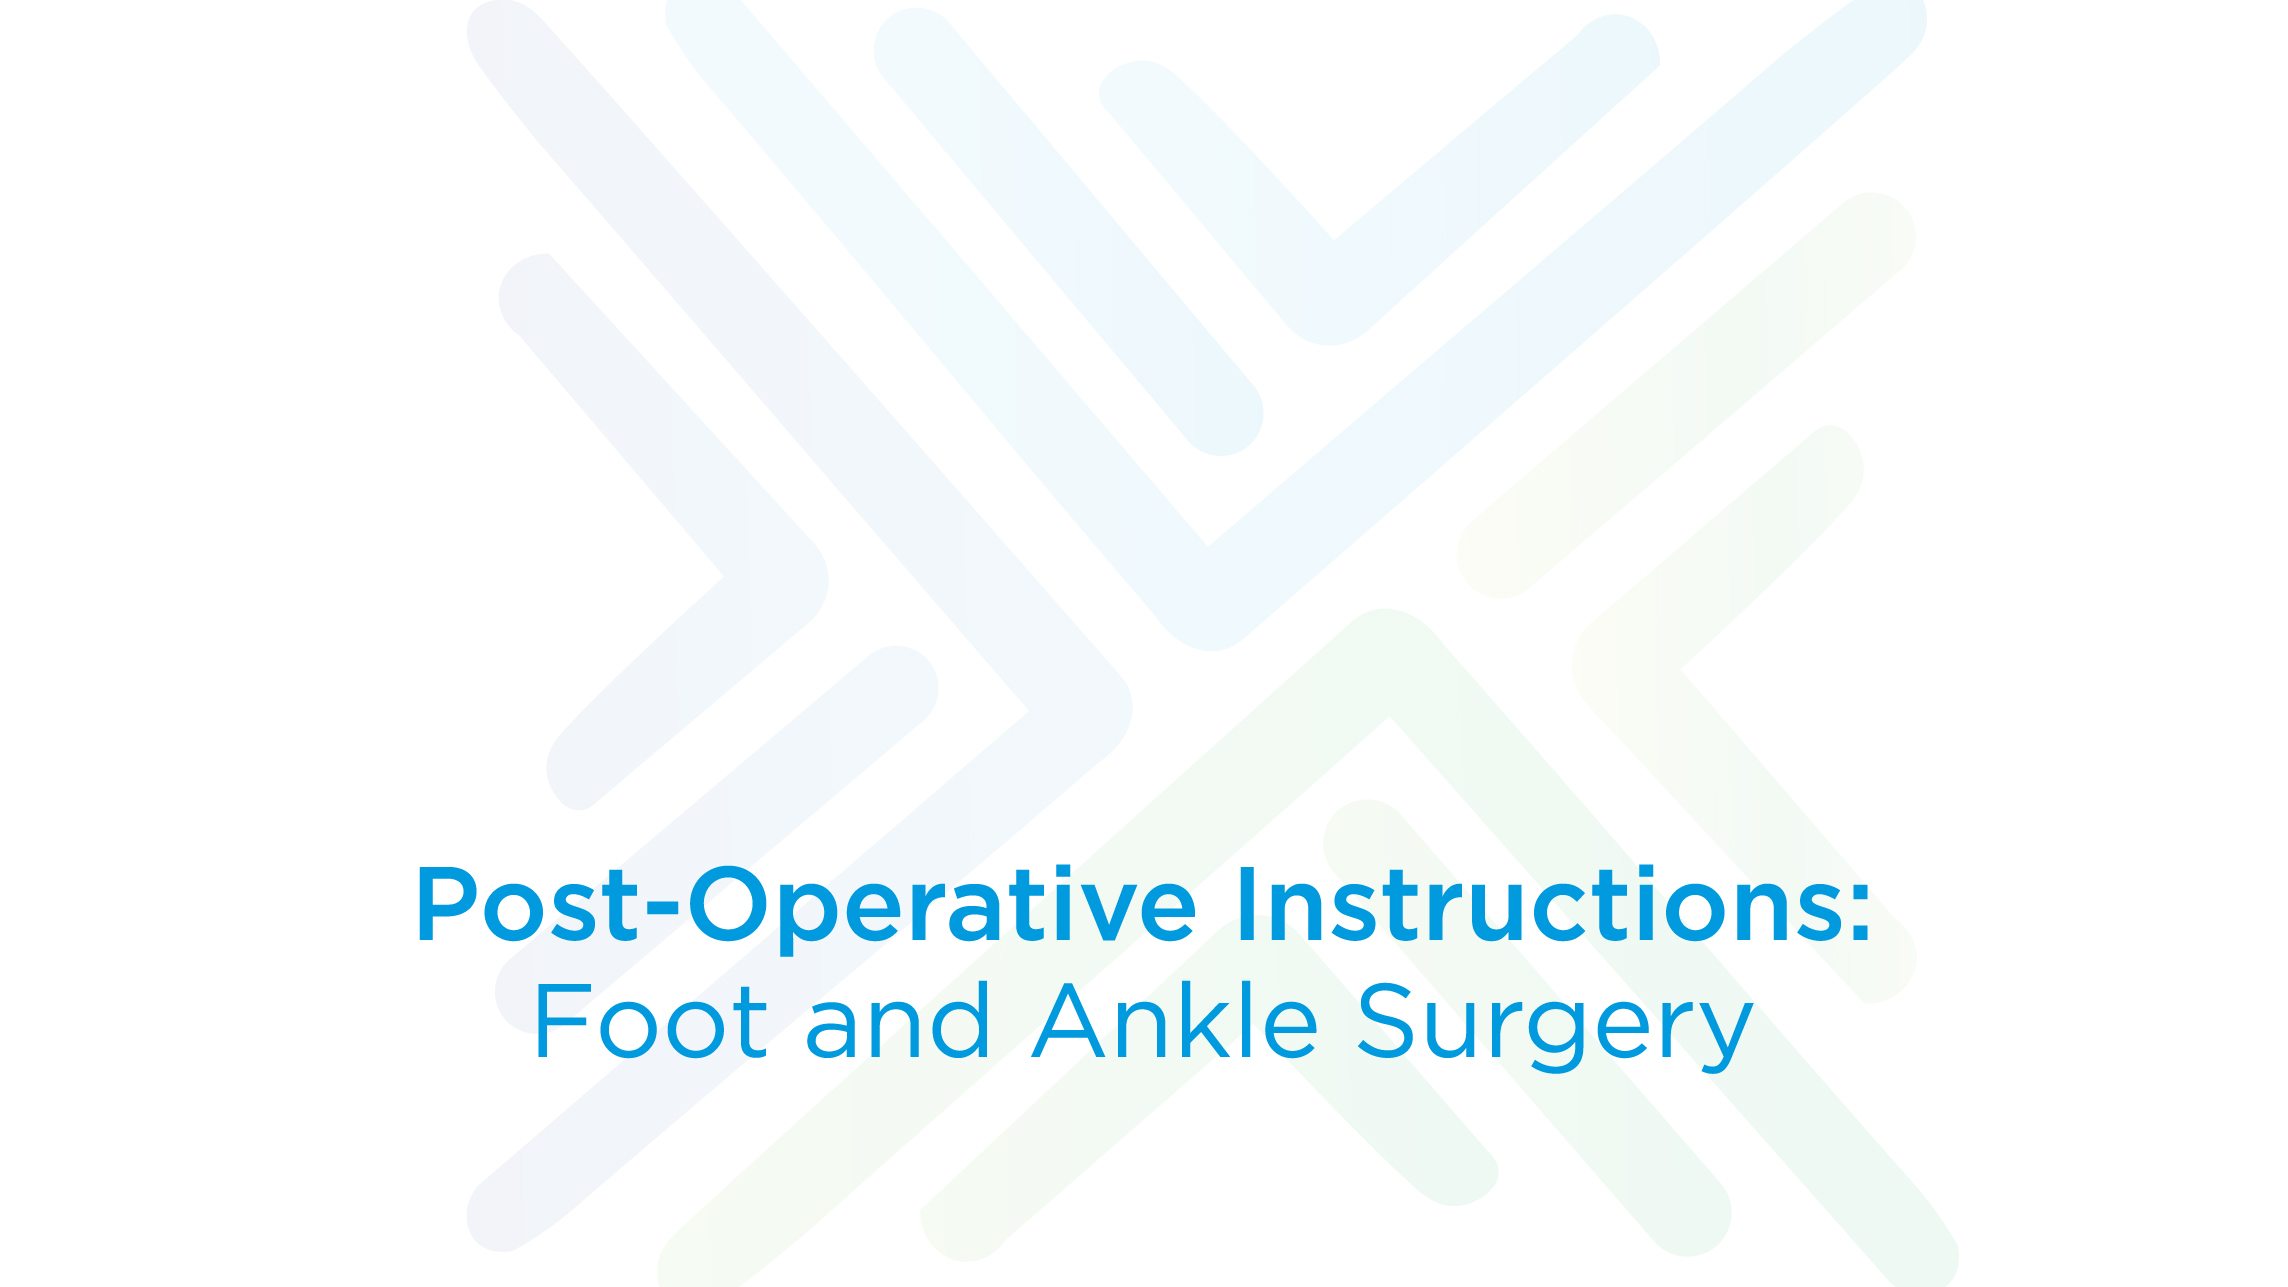 Post-Operative Instructions: Foot and Ankle Surgery